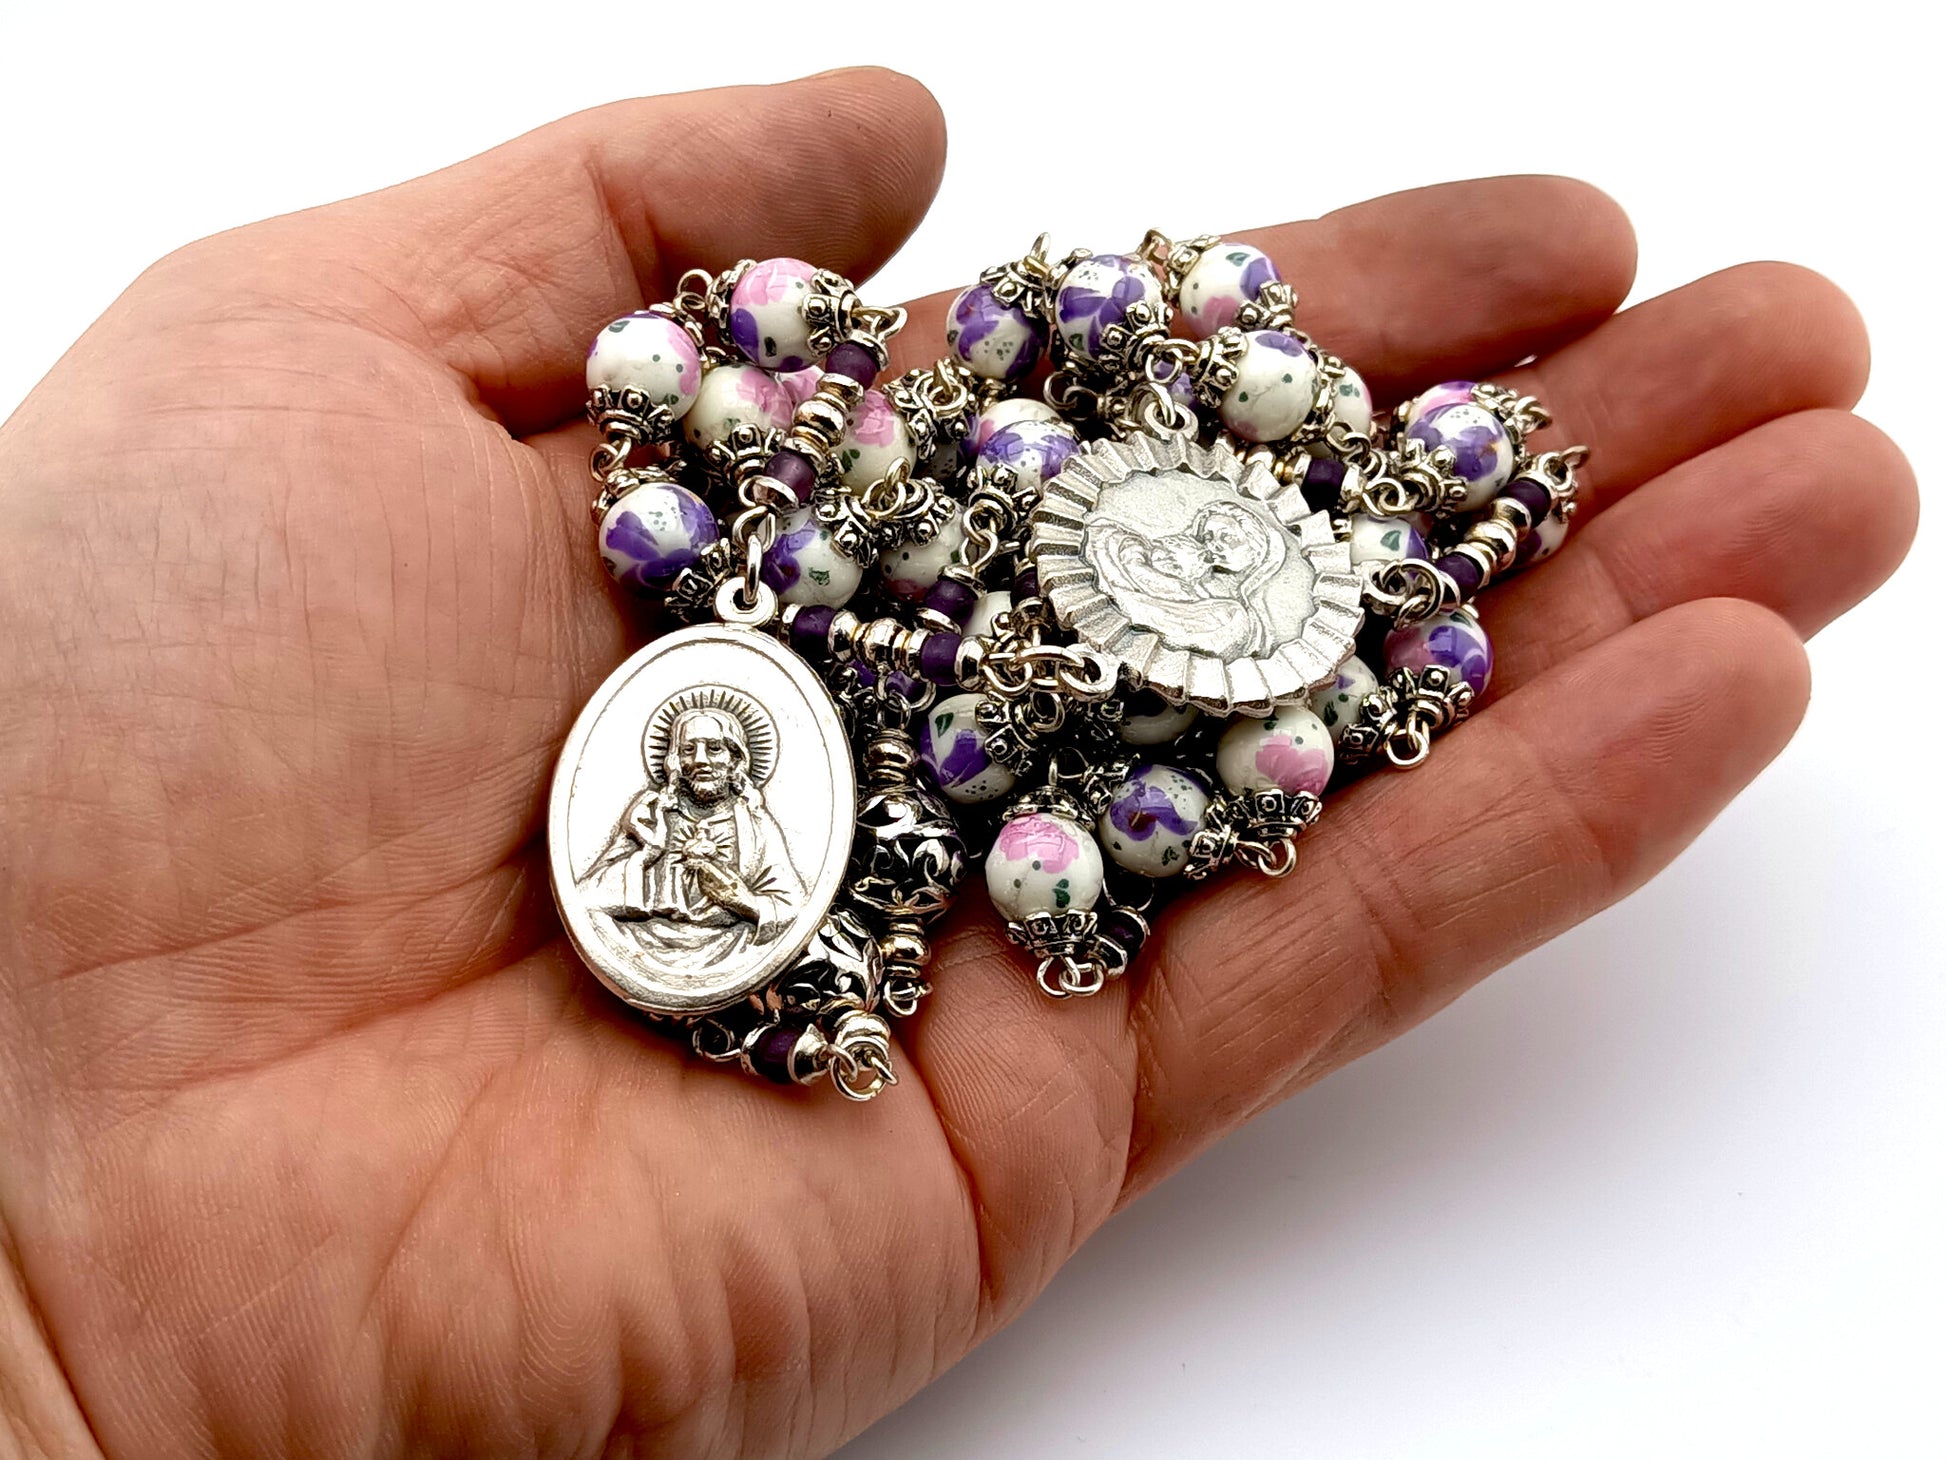 Our Lady of Sorrows unique rosary beads dolor rosary with porcelain and silver beads silver Our Lady medals.